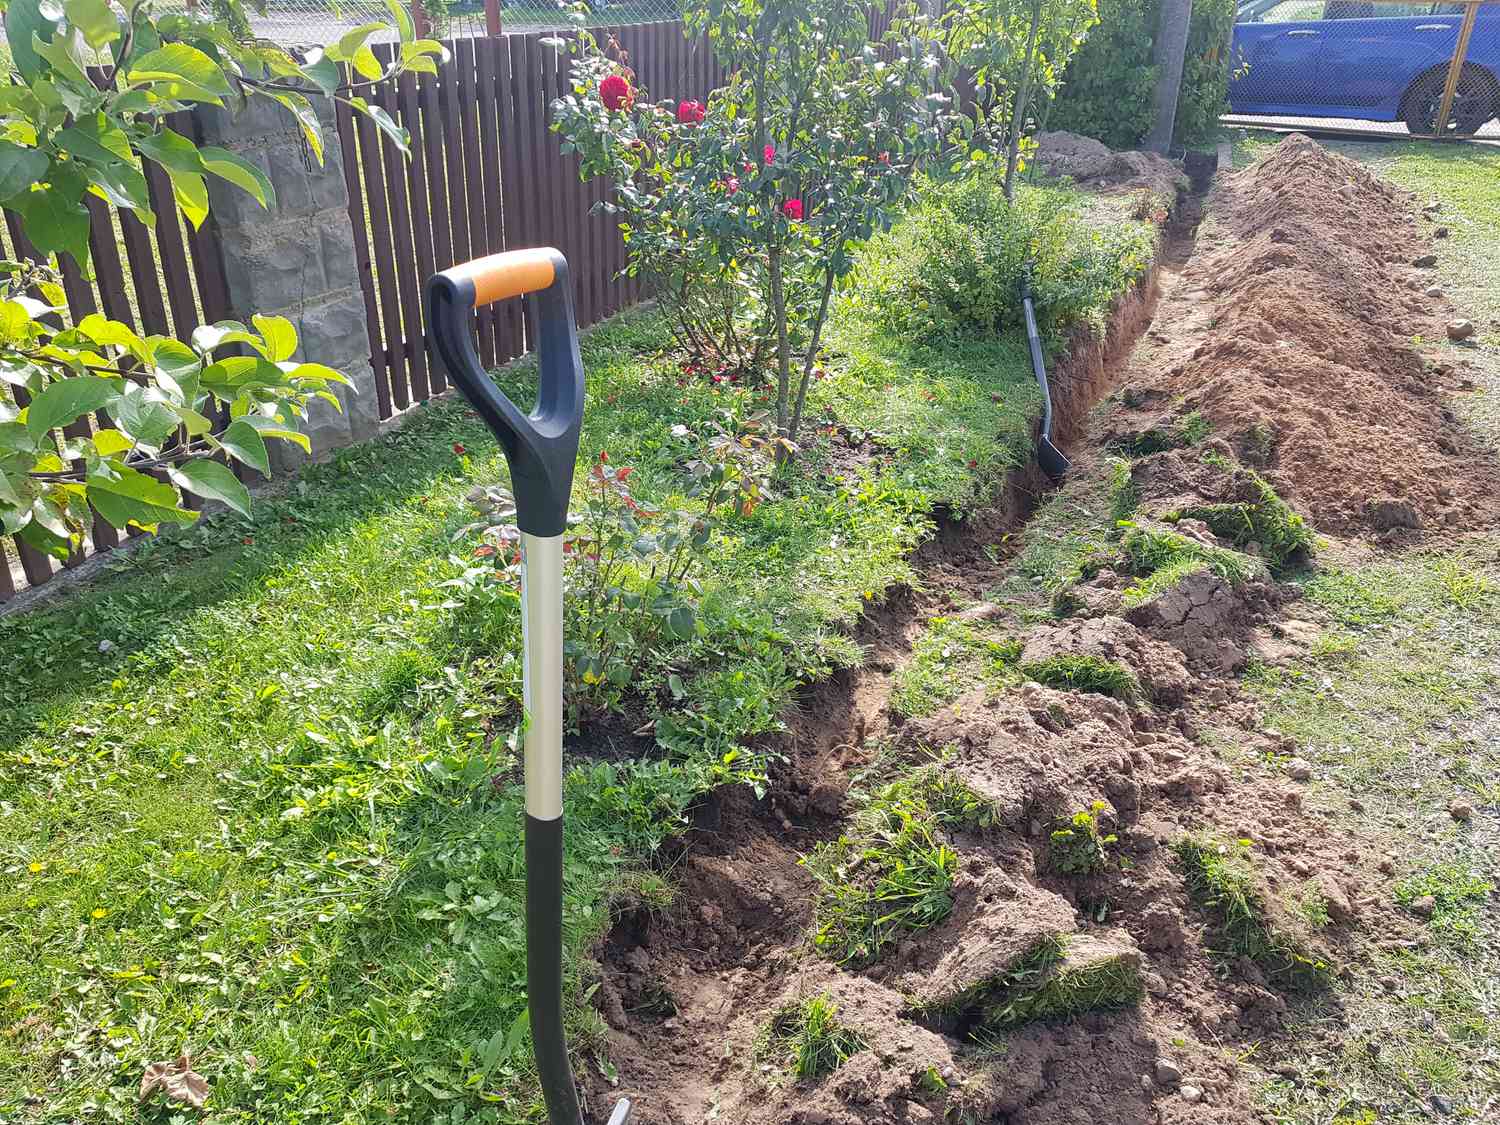 Shovel sticks out in ground on a personal plot